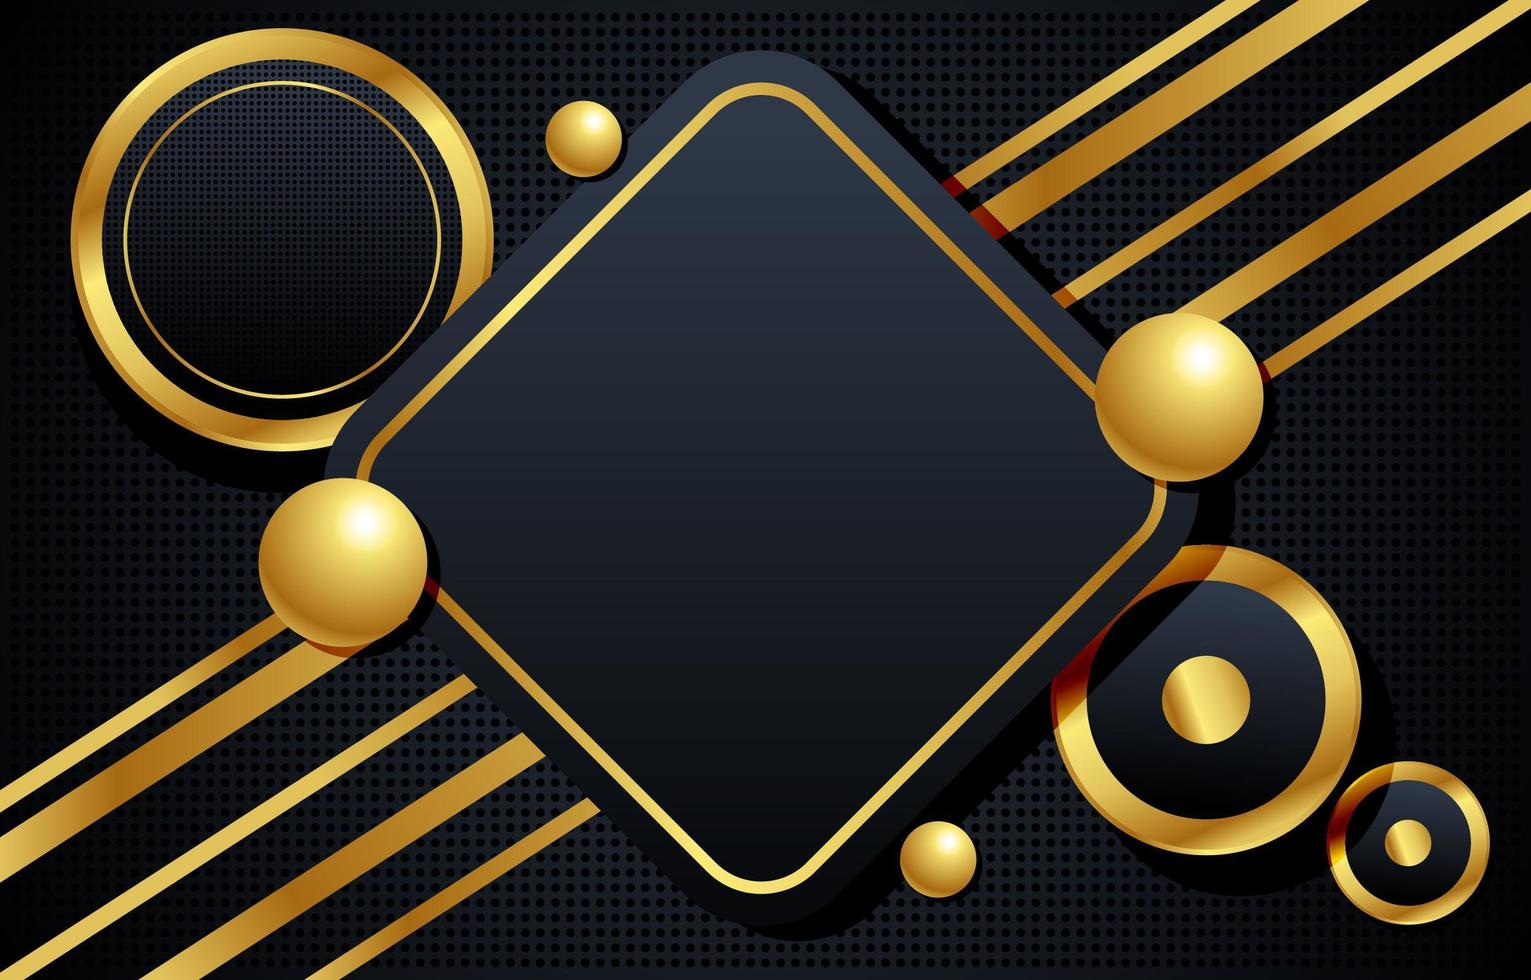 Geometric Gold and Black Background vector